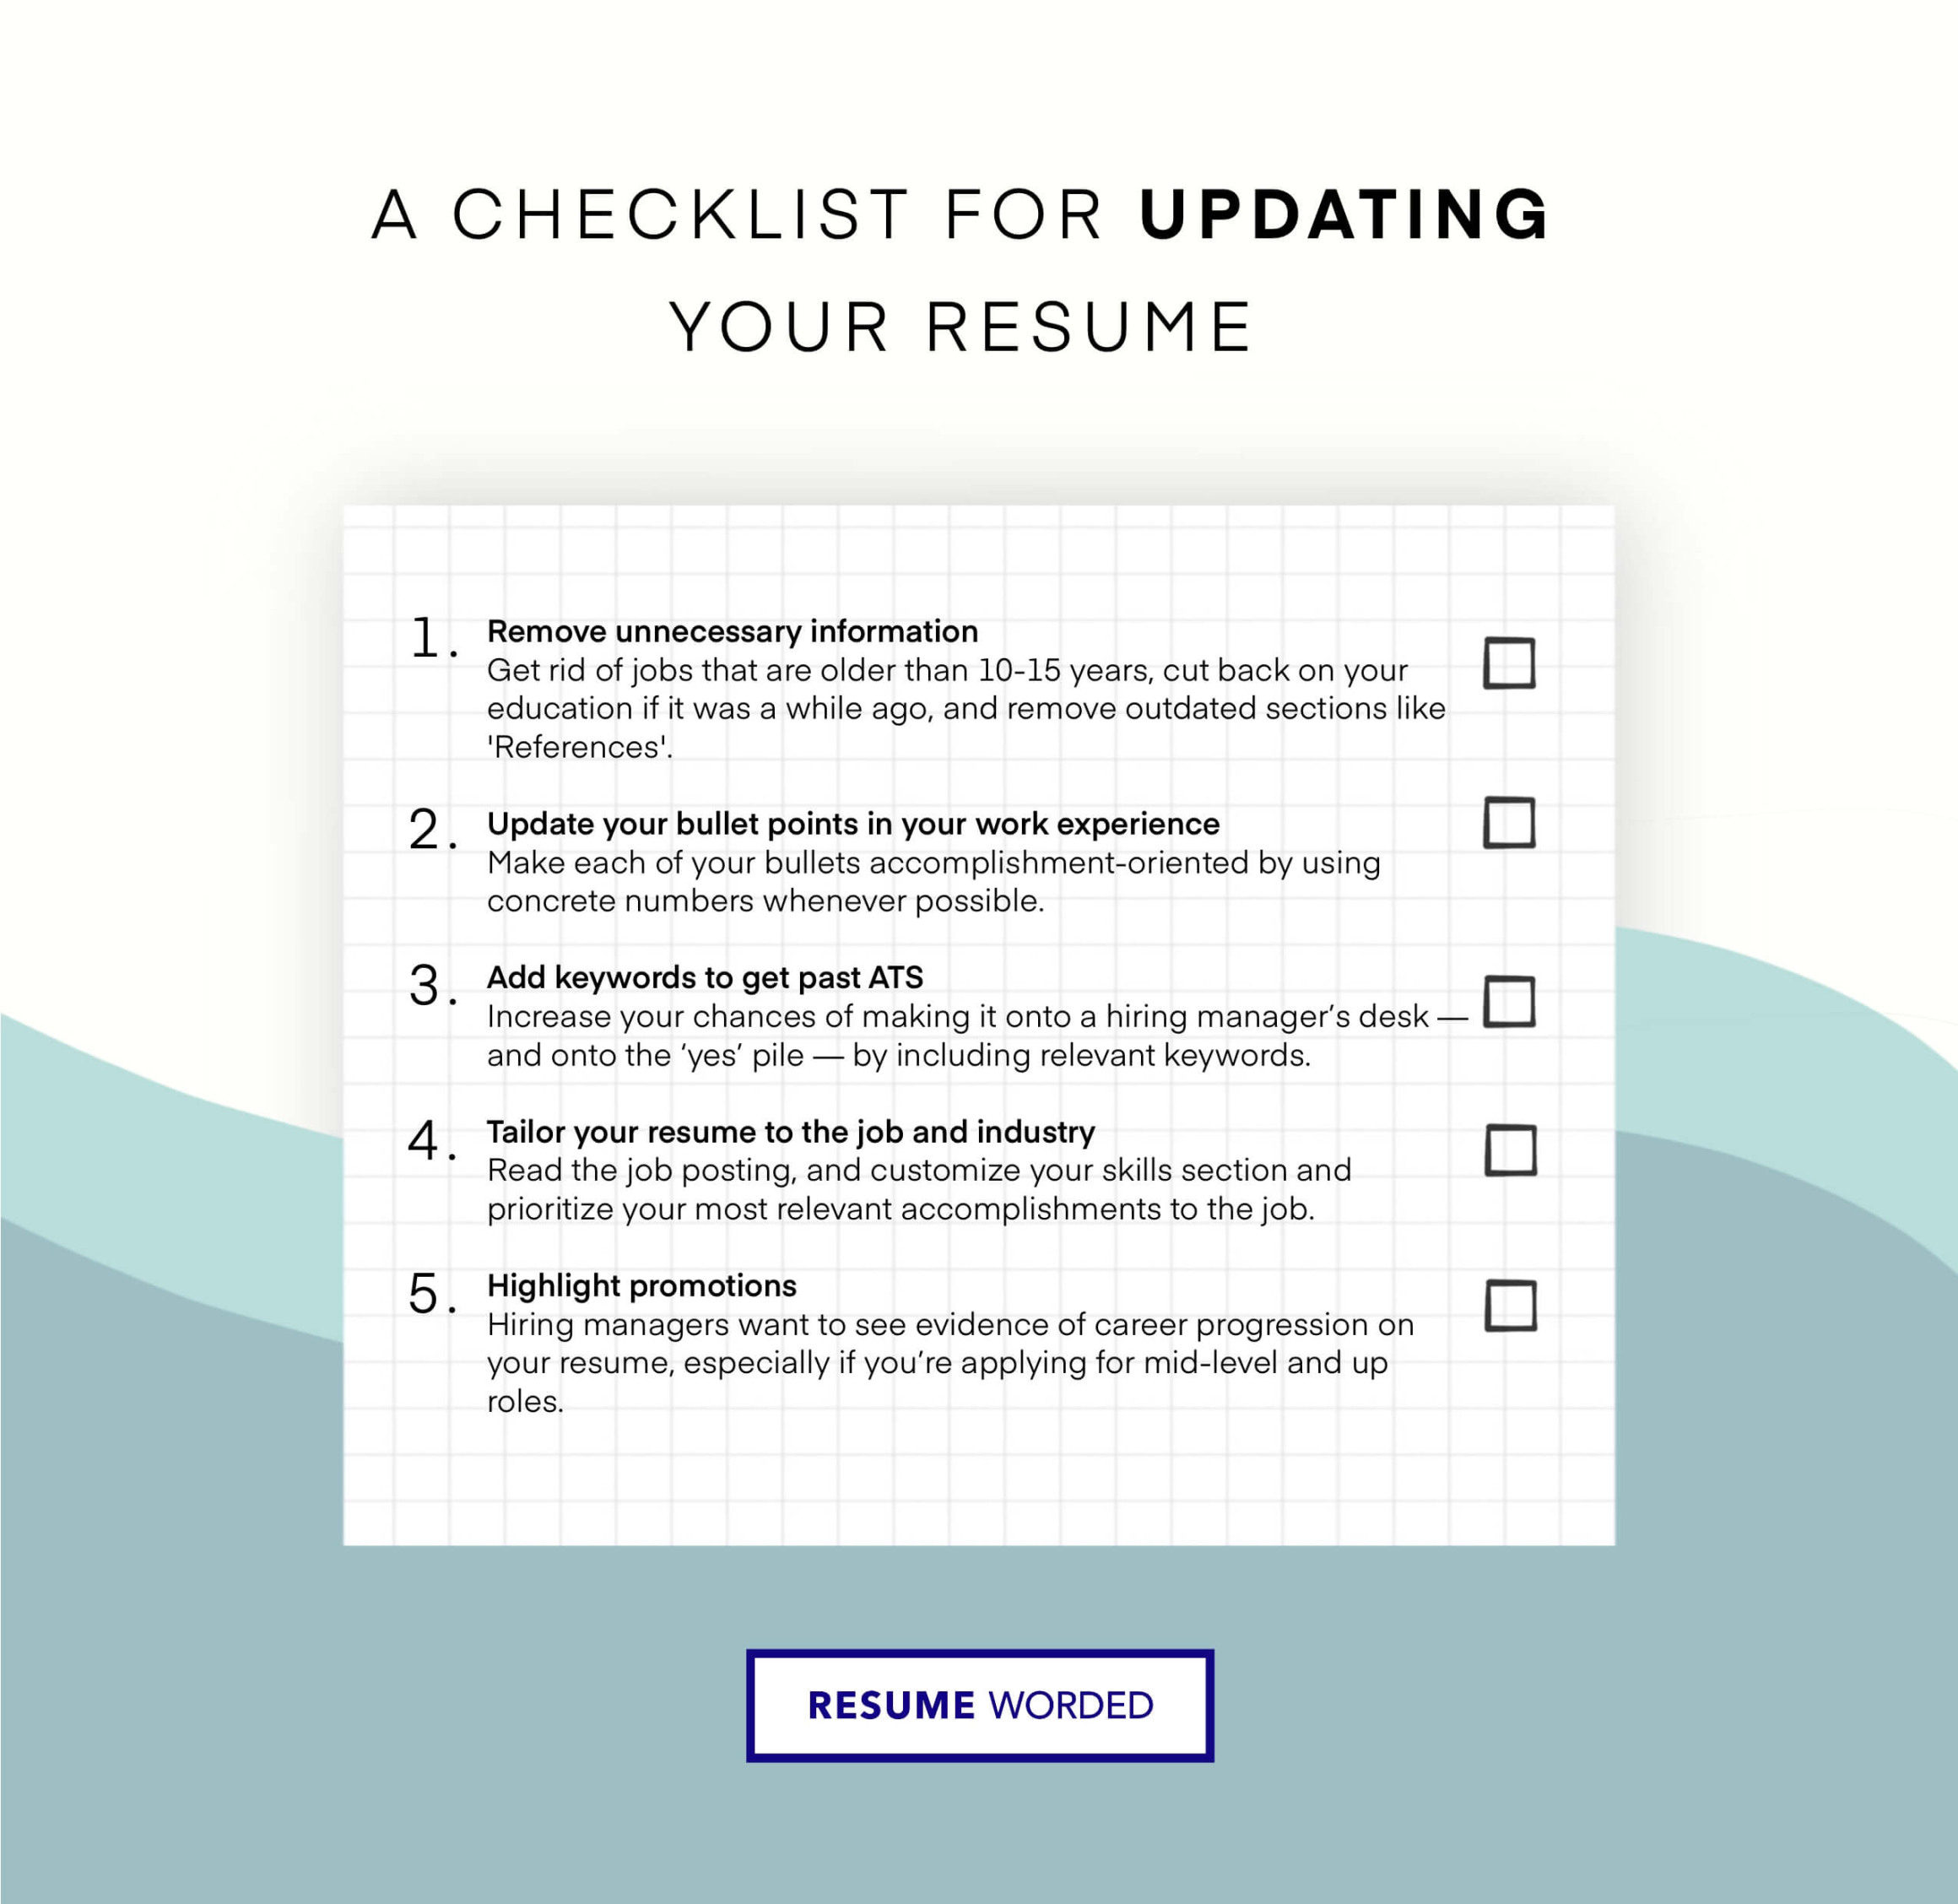 resume red flags that could cost you the job in